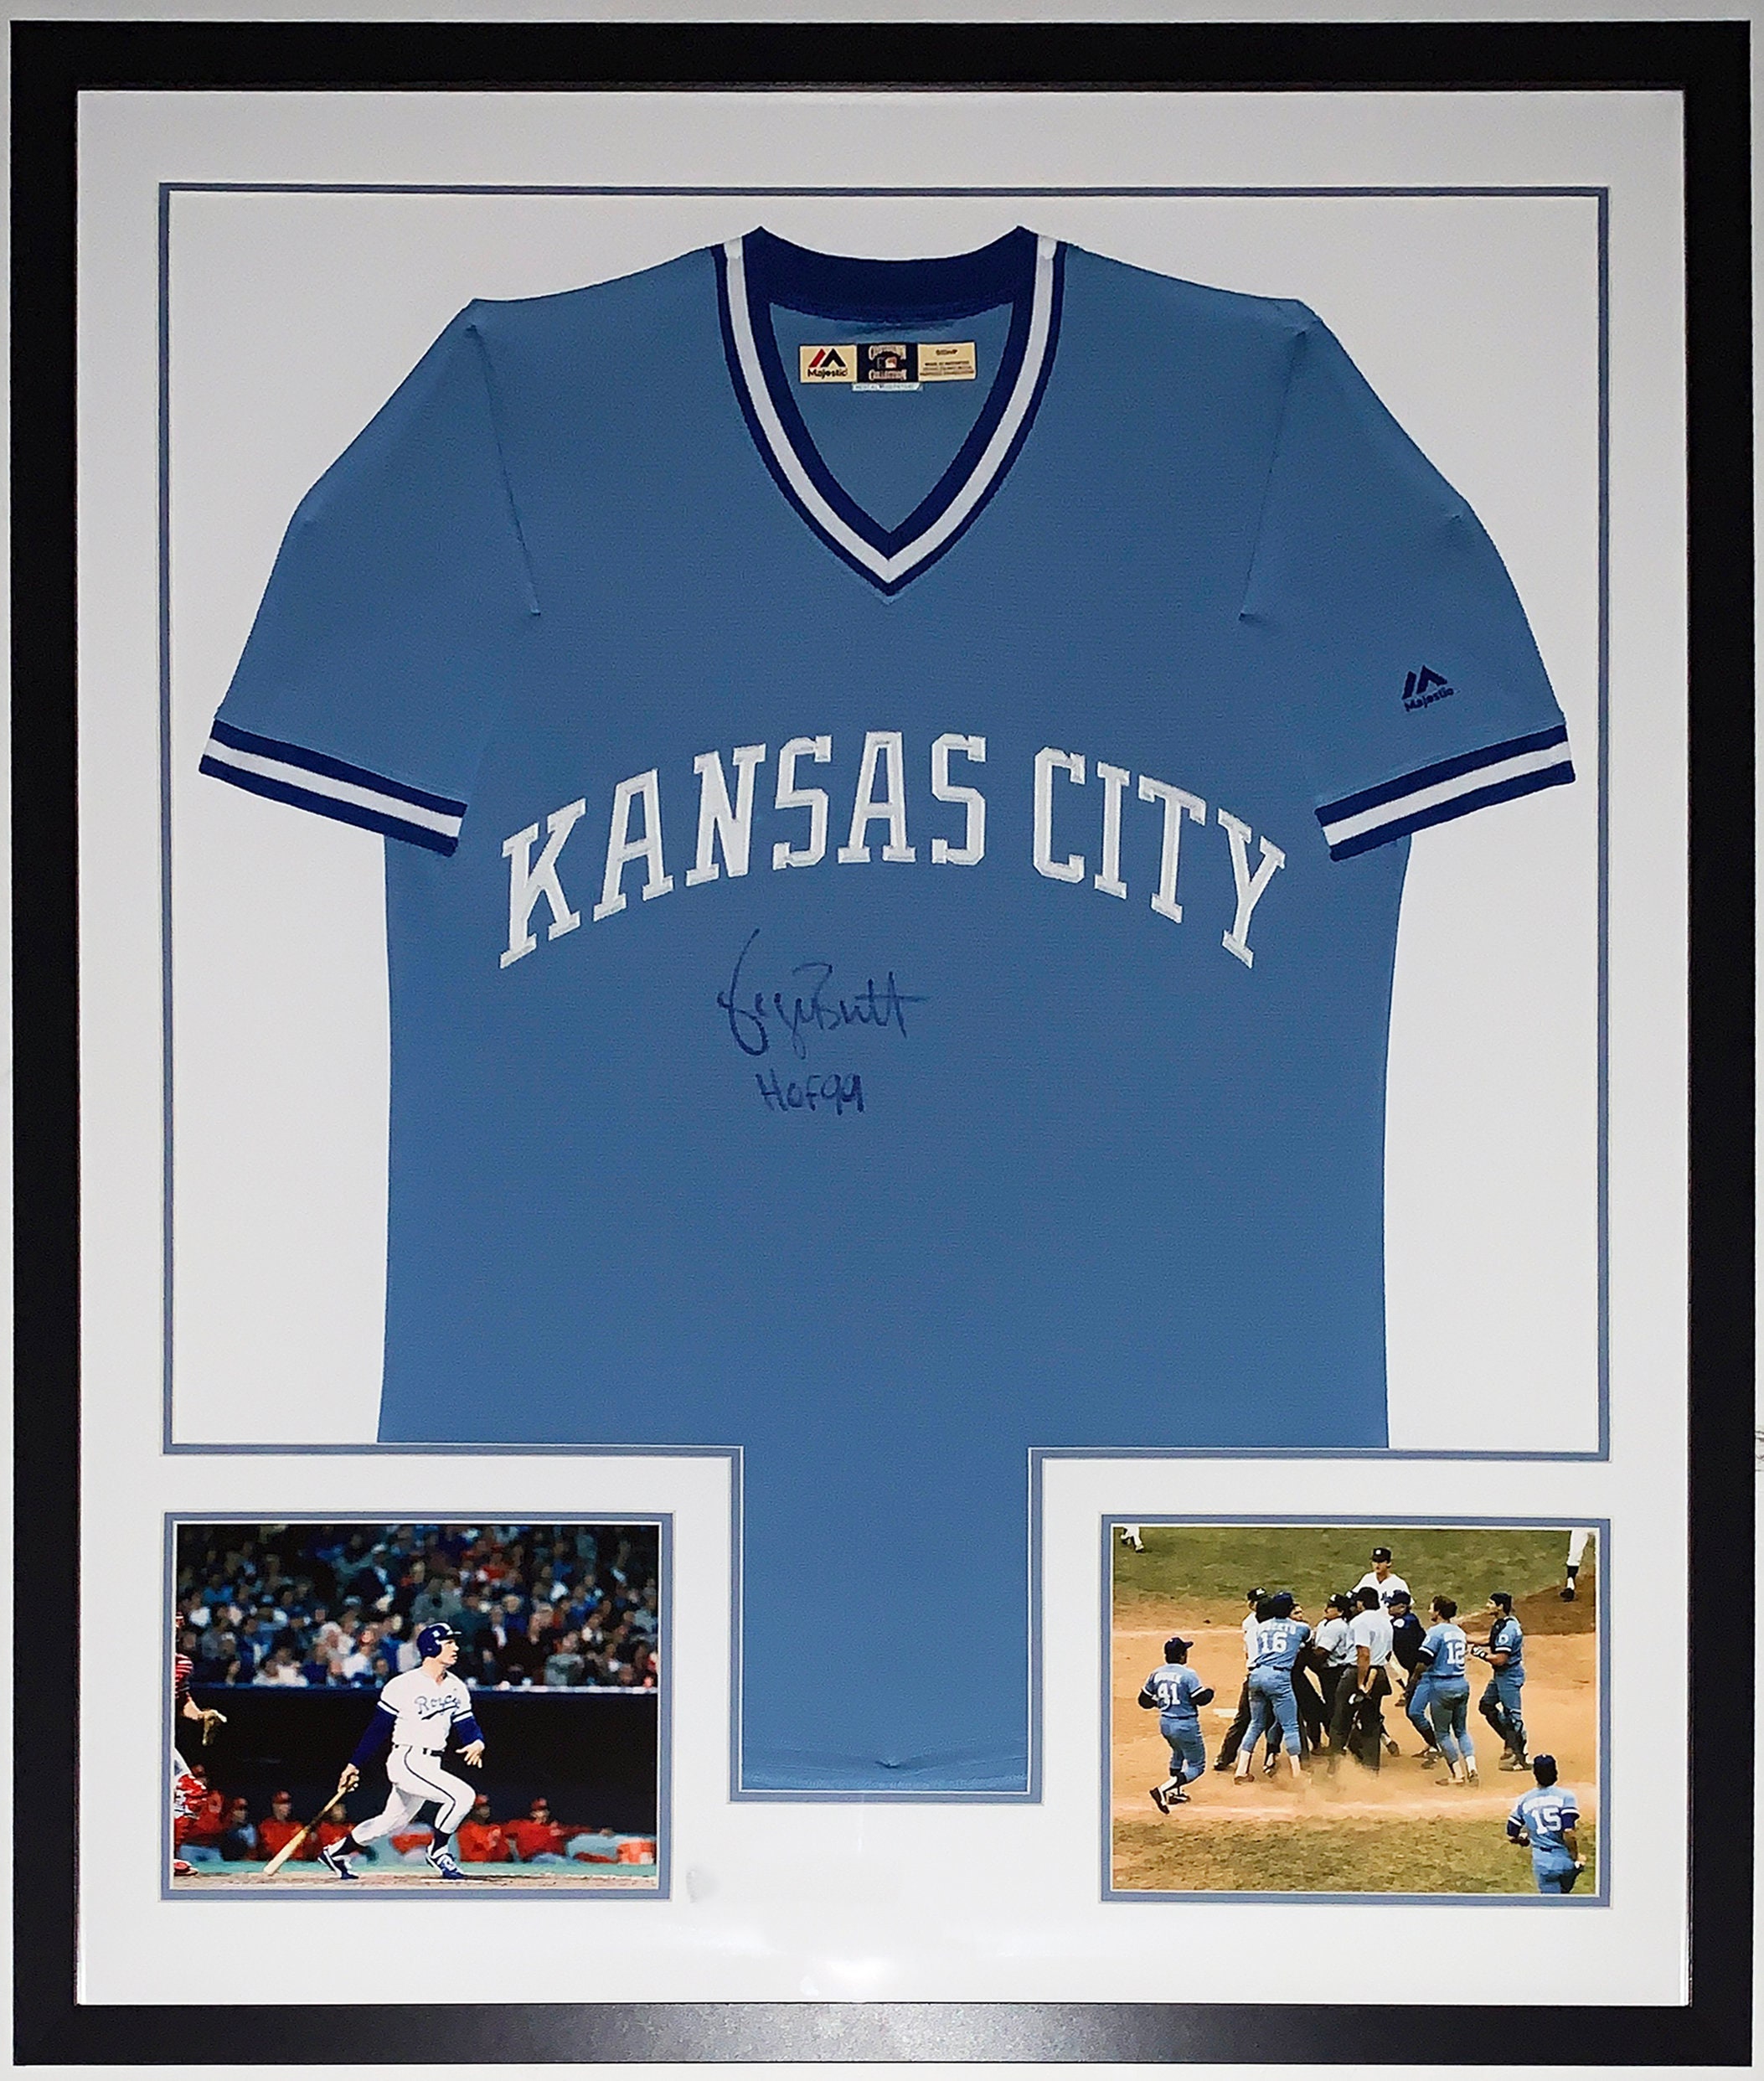 Buy Kansas City Royals Jersey Online In India -  India